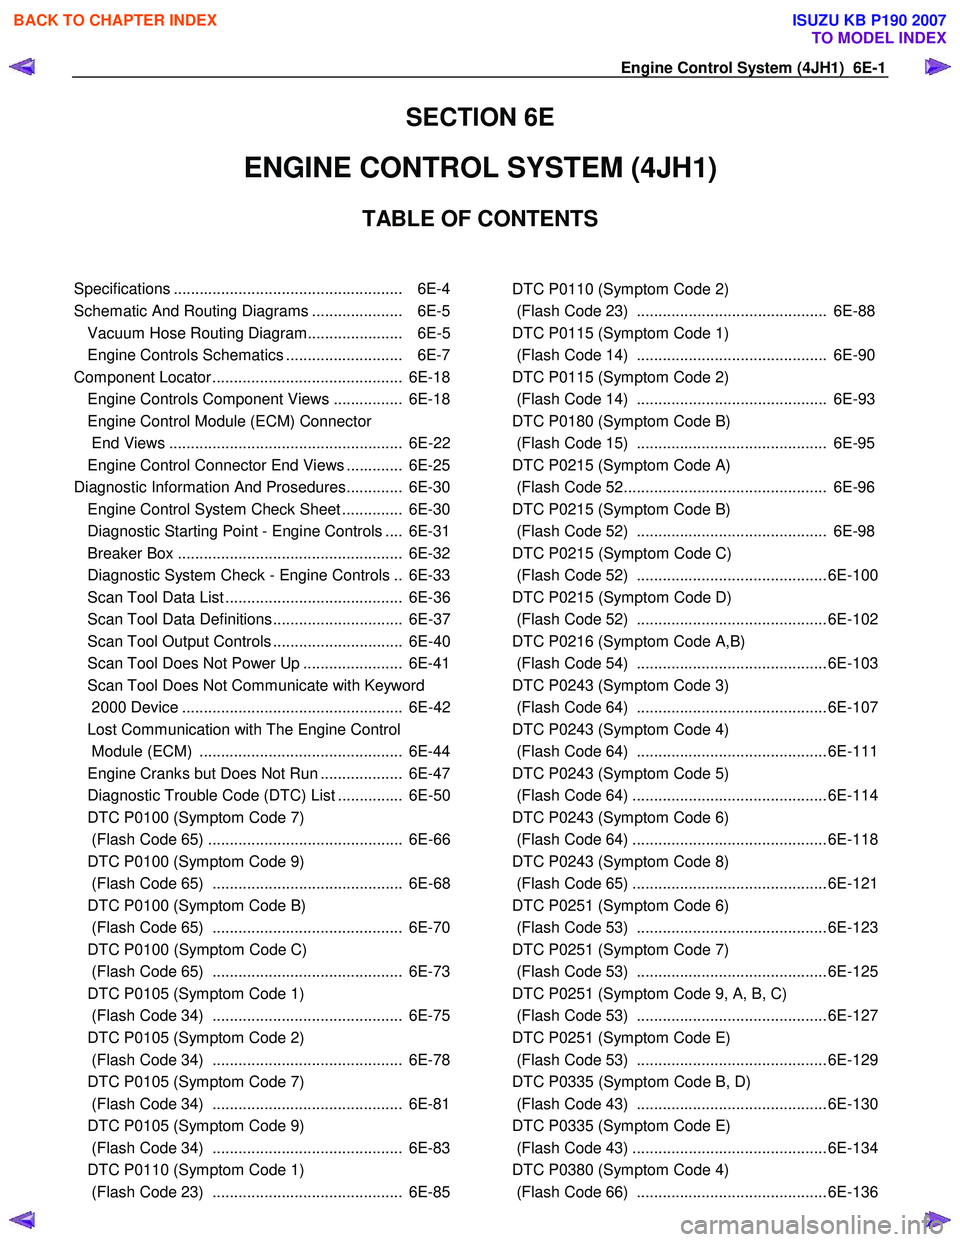 ISUZU KB P190 2007  Workshop Service Manual Engine Control System (4JH1)  6E-1 
SECTION 6E 
ENGINE CONTROL SYSTEM (4JH1)  
TABLE OF CONTENTS 
  
 
Specifications ..................................................... 6E-4 
Schematic And Routing 